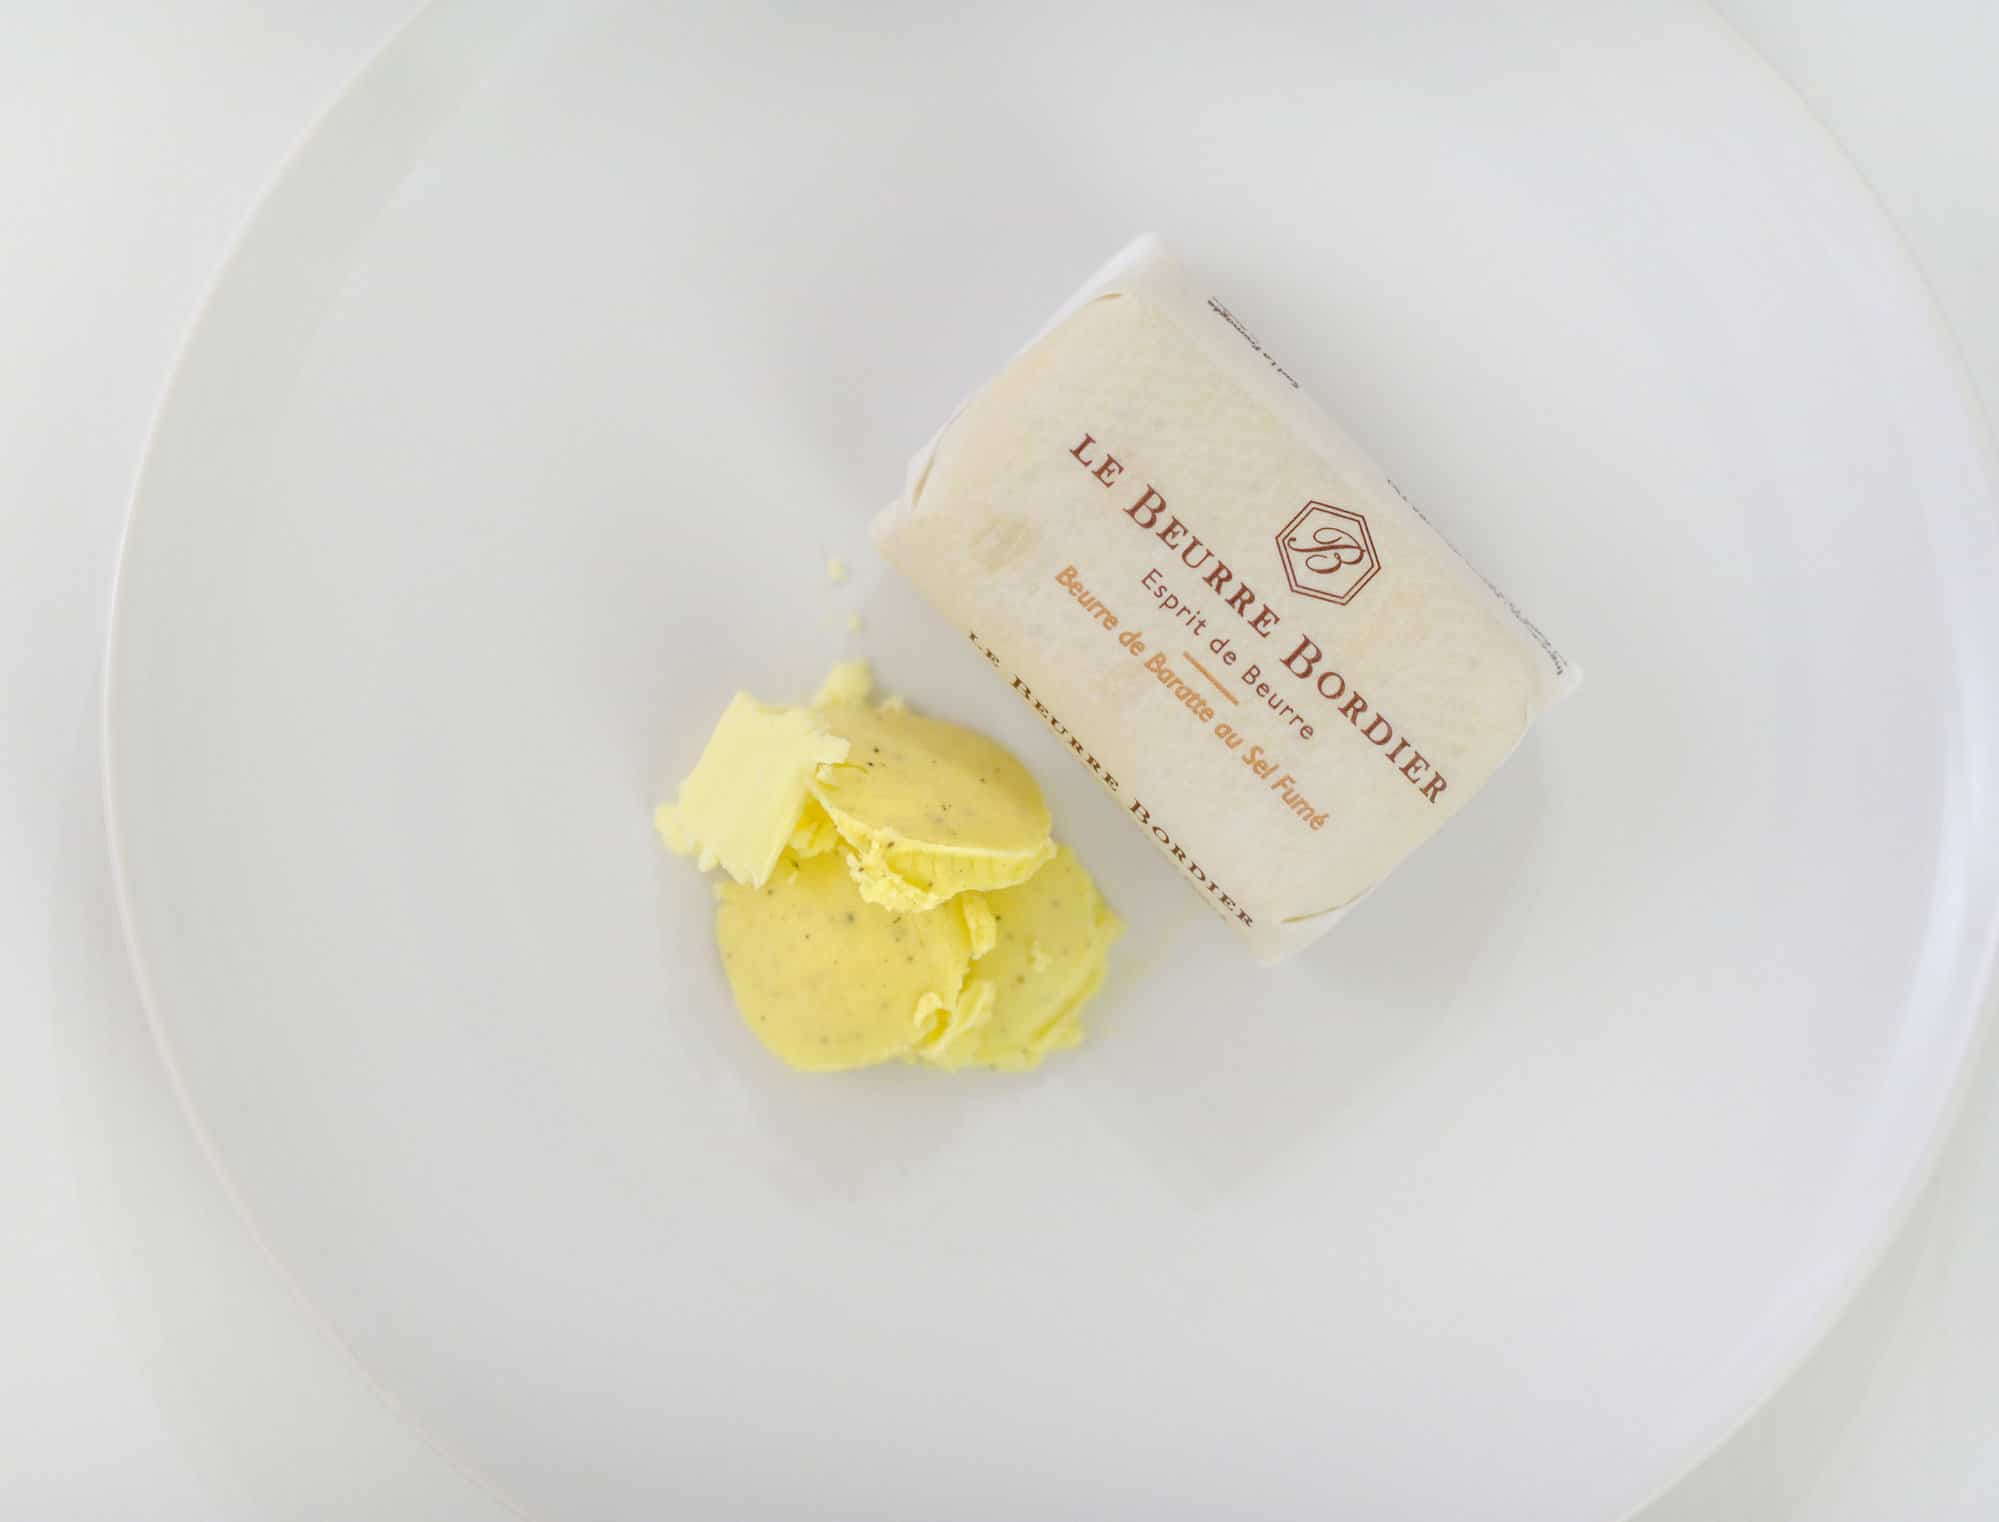 Le Beurre Bordier, a creamy, tasty artisanal butter, resting on top of a white plate.